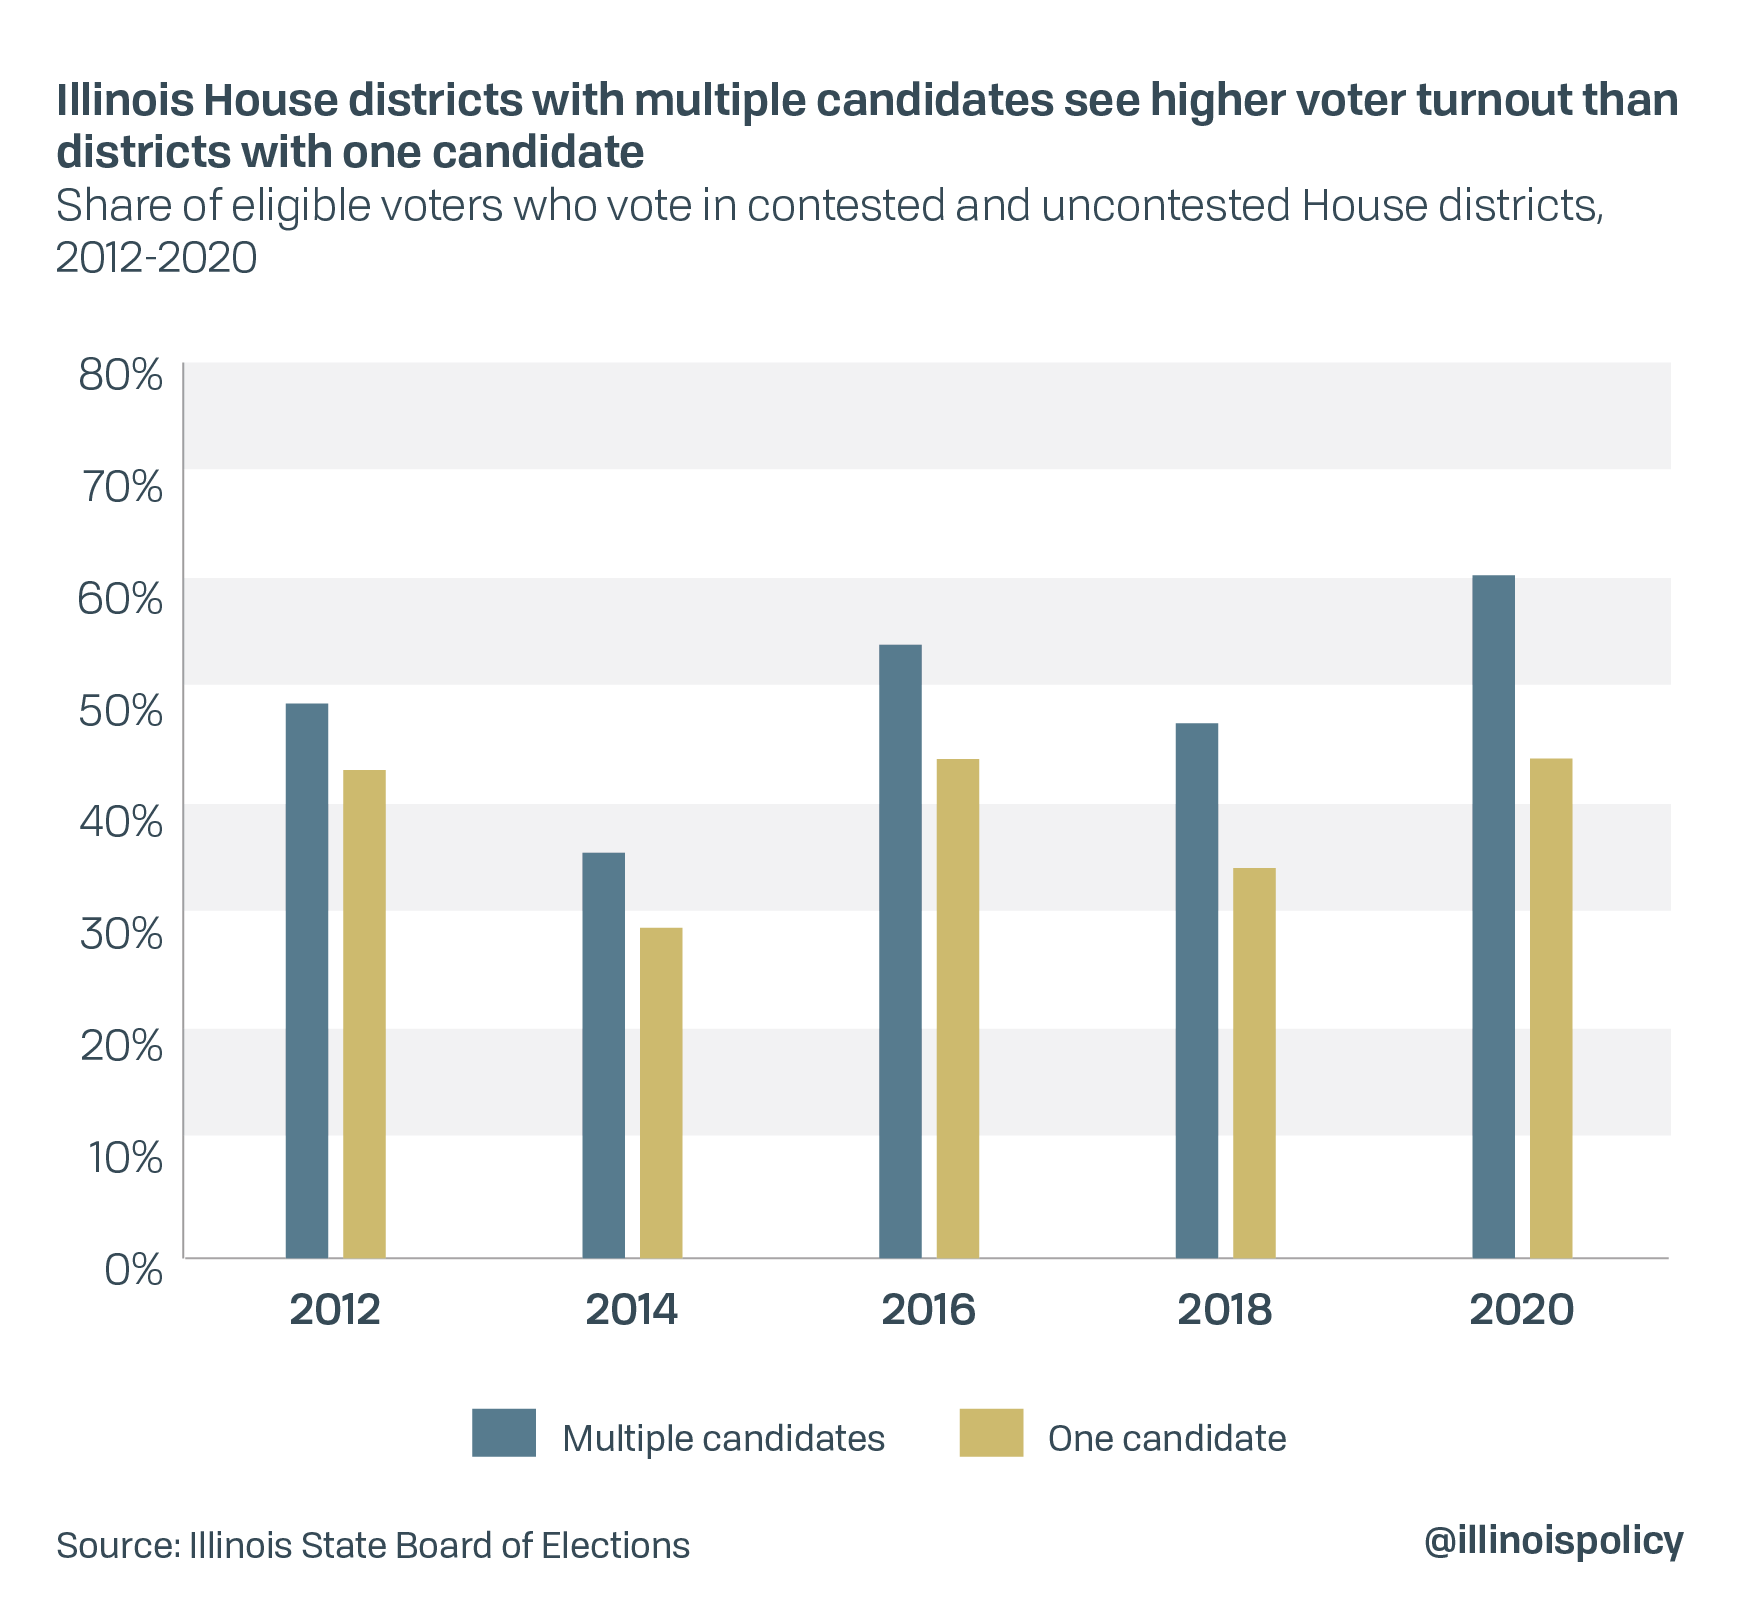 Illinois House districts with multiple candidates see higher turnout than districts with one candidate